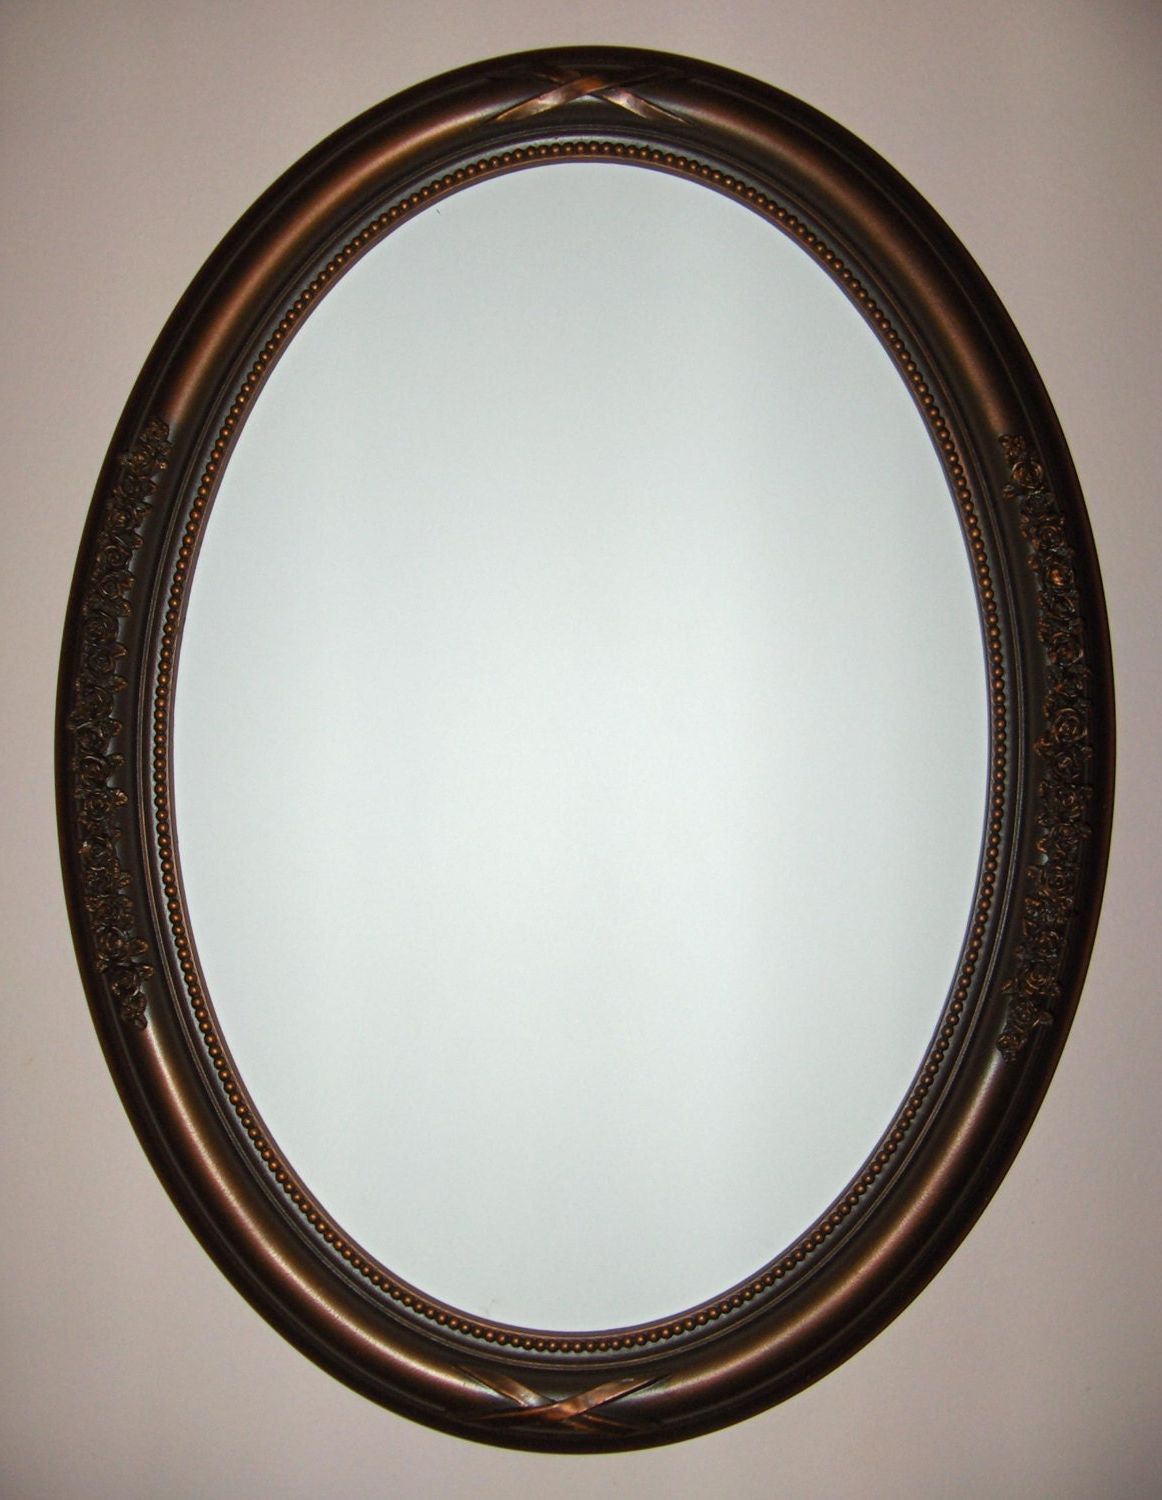 Most Recently Released Ceiling Hung Oiled Bronze Oval Mirrors Throughout Oval Mirror With Oil Rubbed Bronze Color Frame (View 12 of 15)